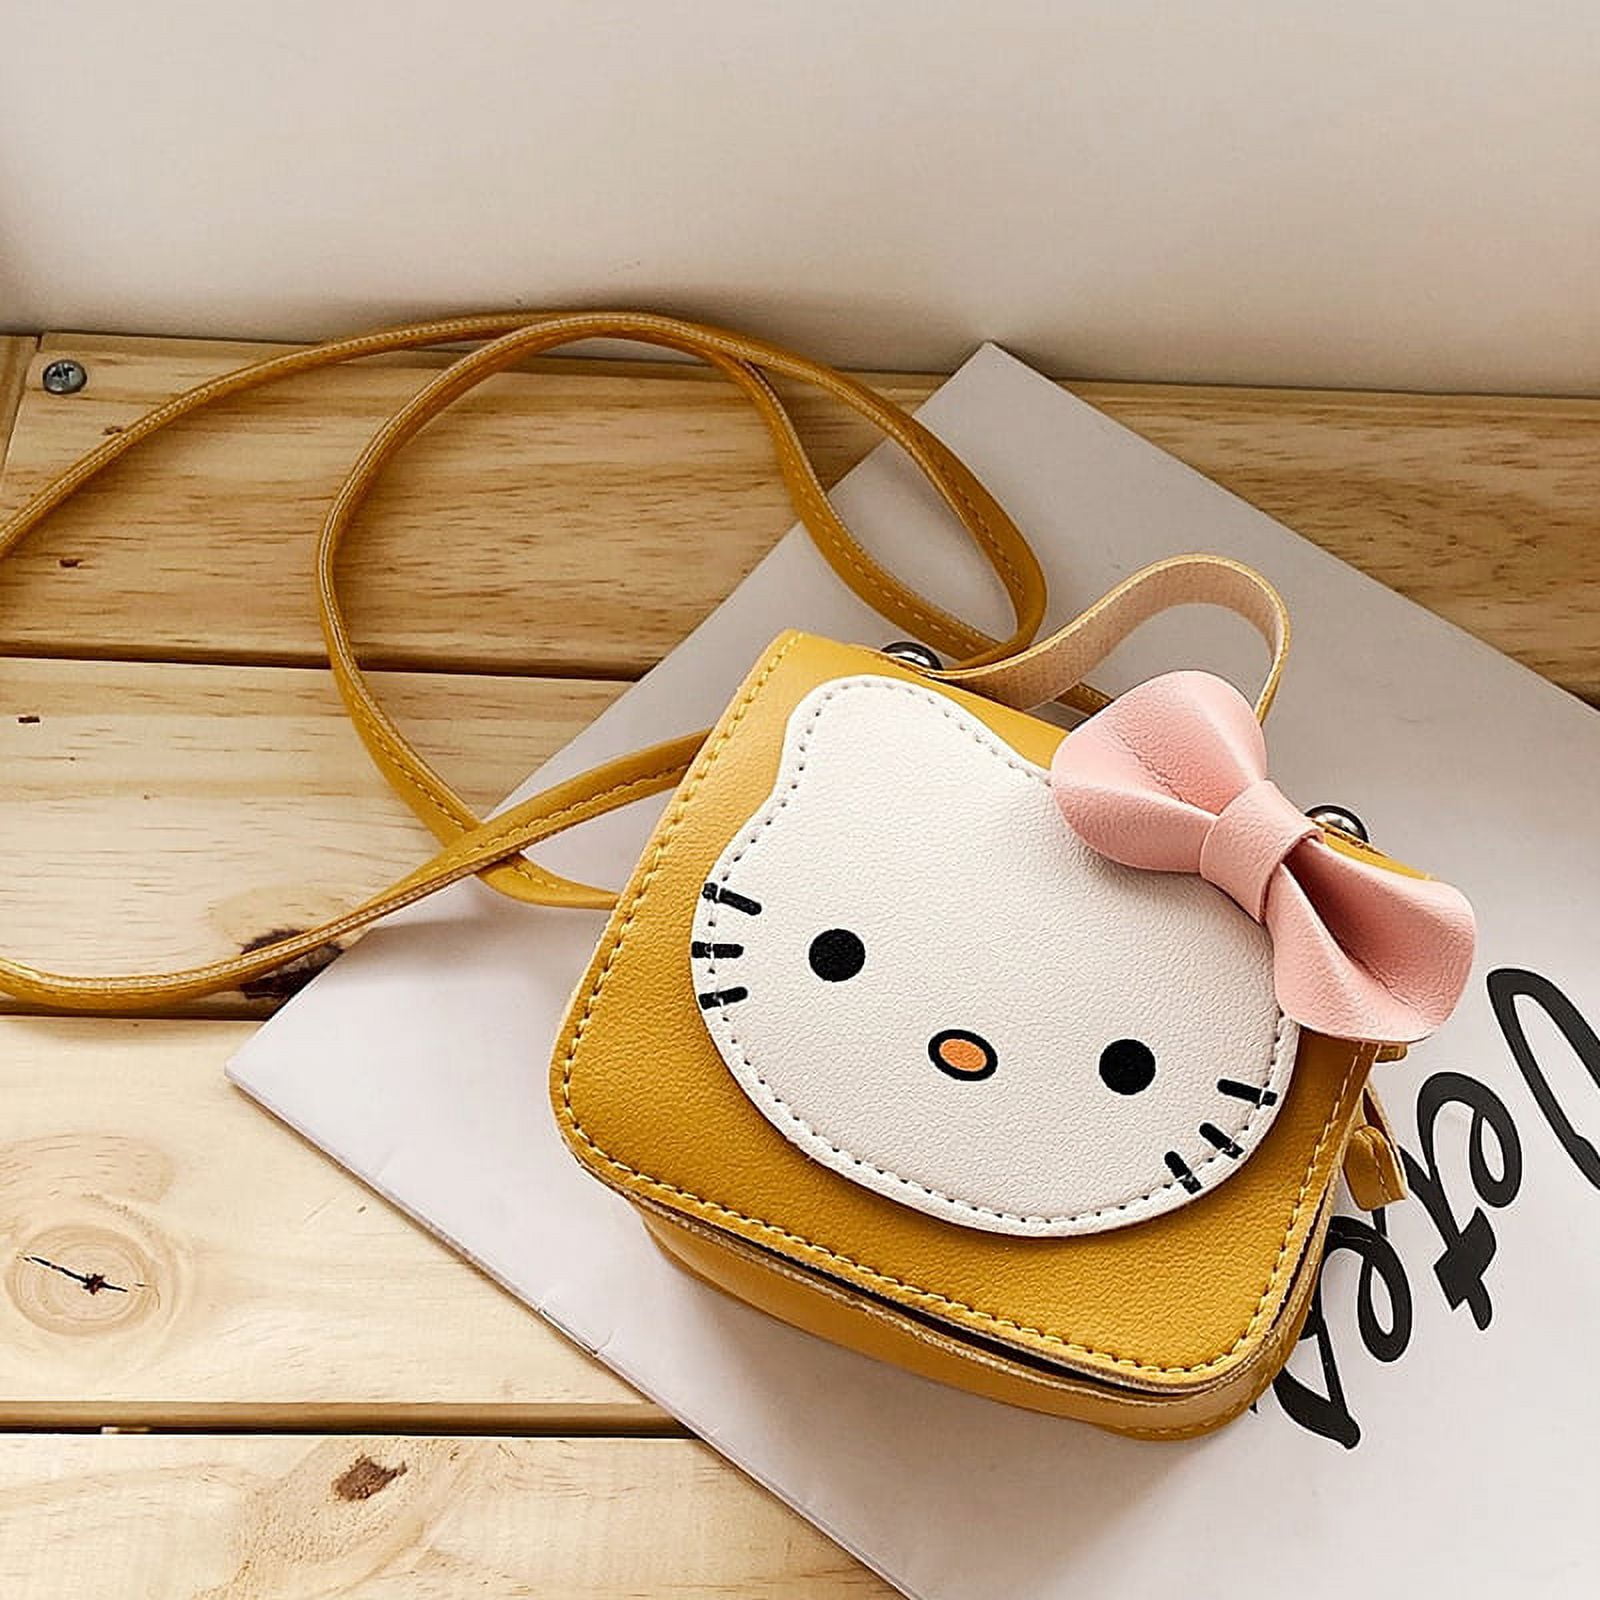 Cute Small Crossbody Purse | Mini Soft PU Leather Messenger Shoulder Bag |  Lovely Gift for Her | A-g-e-s 3-6